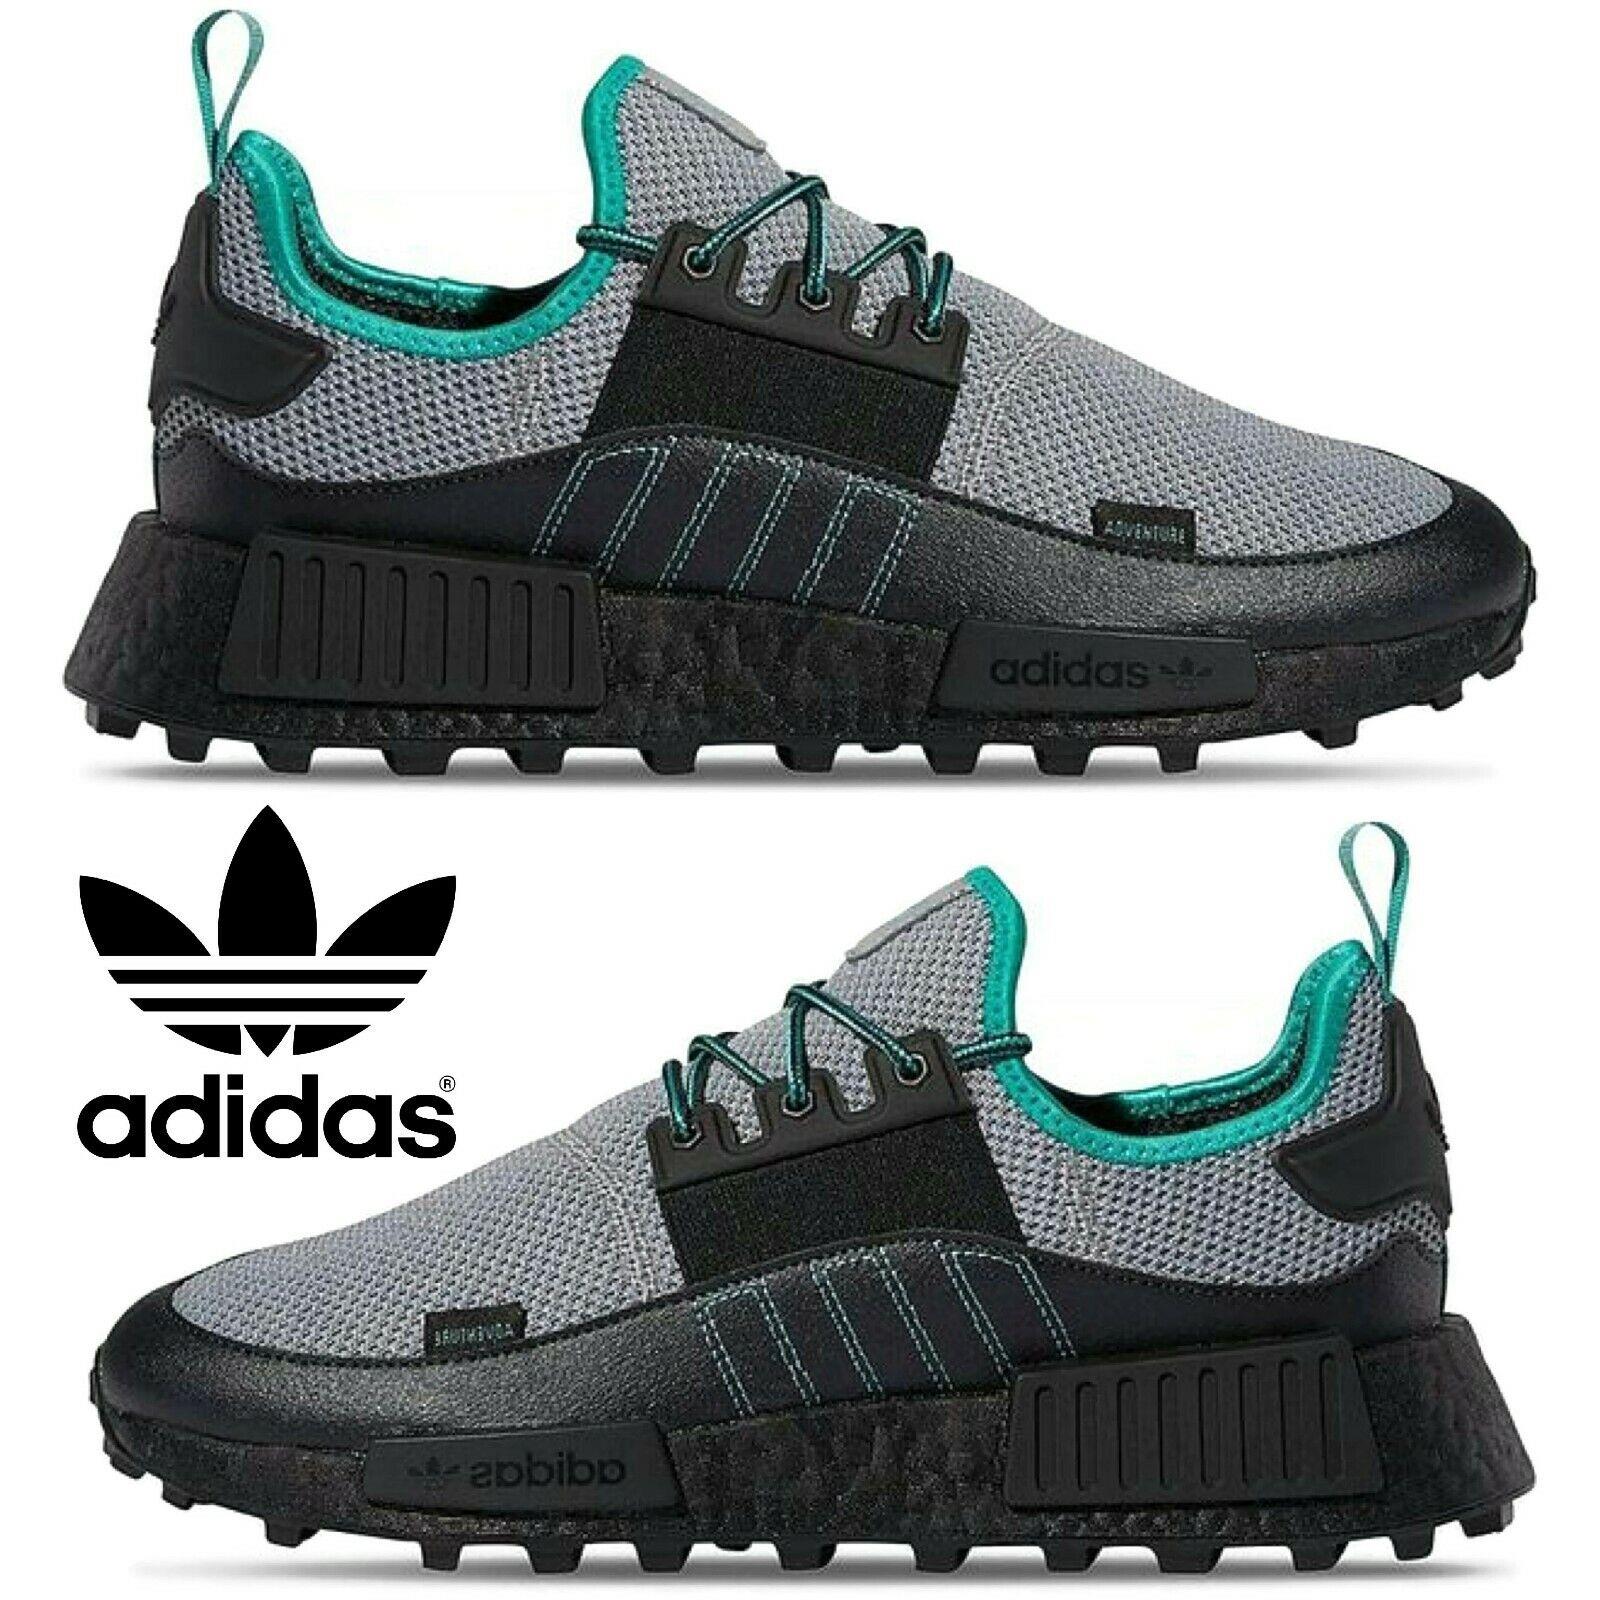 Adidas Originals Nmd R1 Men`s Sneakers Running Shoes Gym Casual Sport Gray